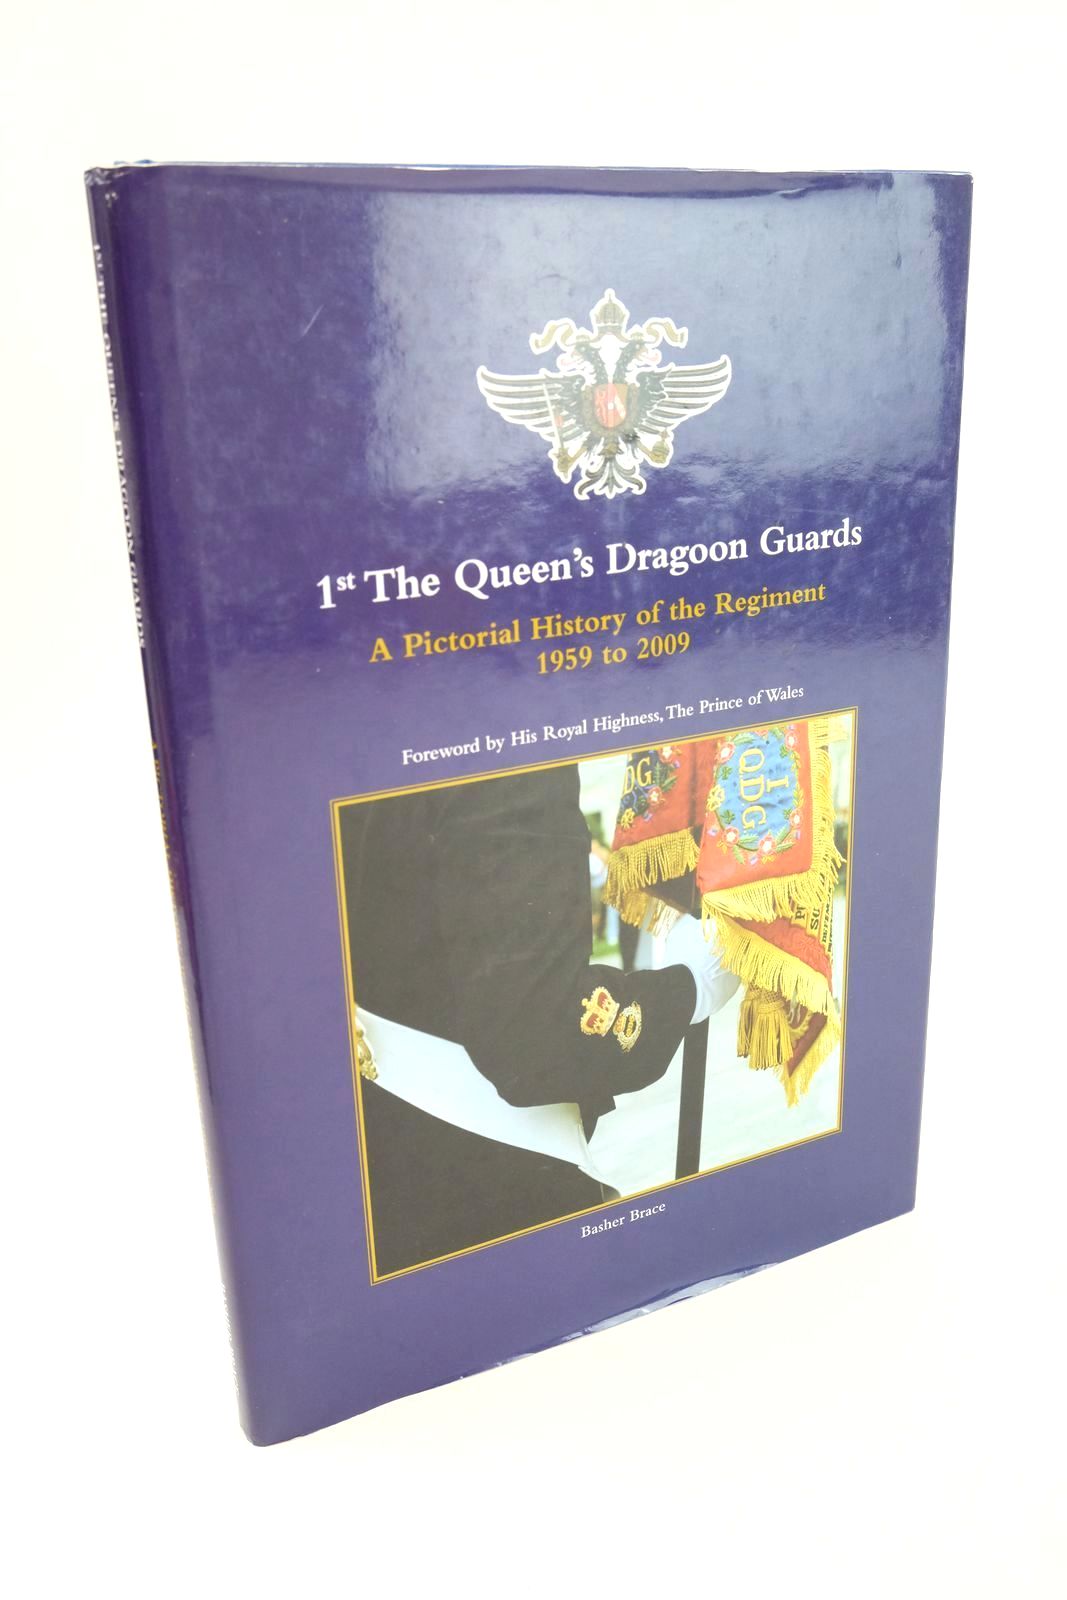 Photo of 1ST THE QUEEN'S DRAGOON GUARDS: A PICTORIAL HISTORY OF THE REGIMENT 1959 TO 2009 written by Brace, Basher published by 1st The Queen's Dragoon Guards (STOCK CODE: 1324874)  for sale by Stella & Rose's Books